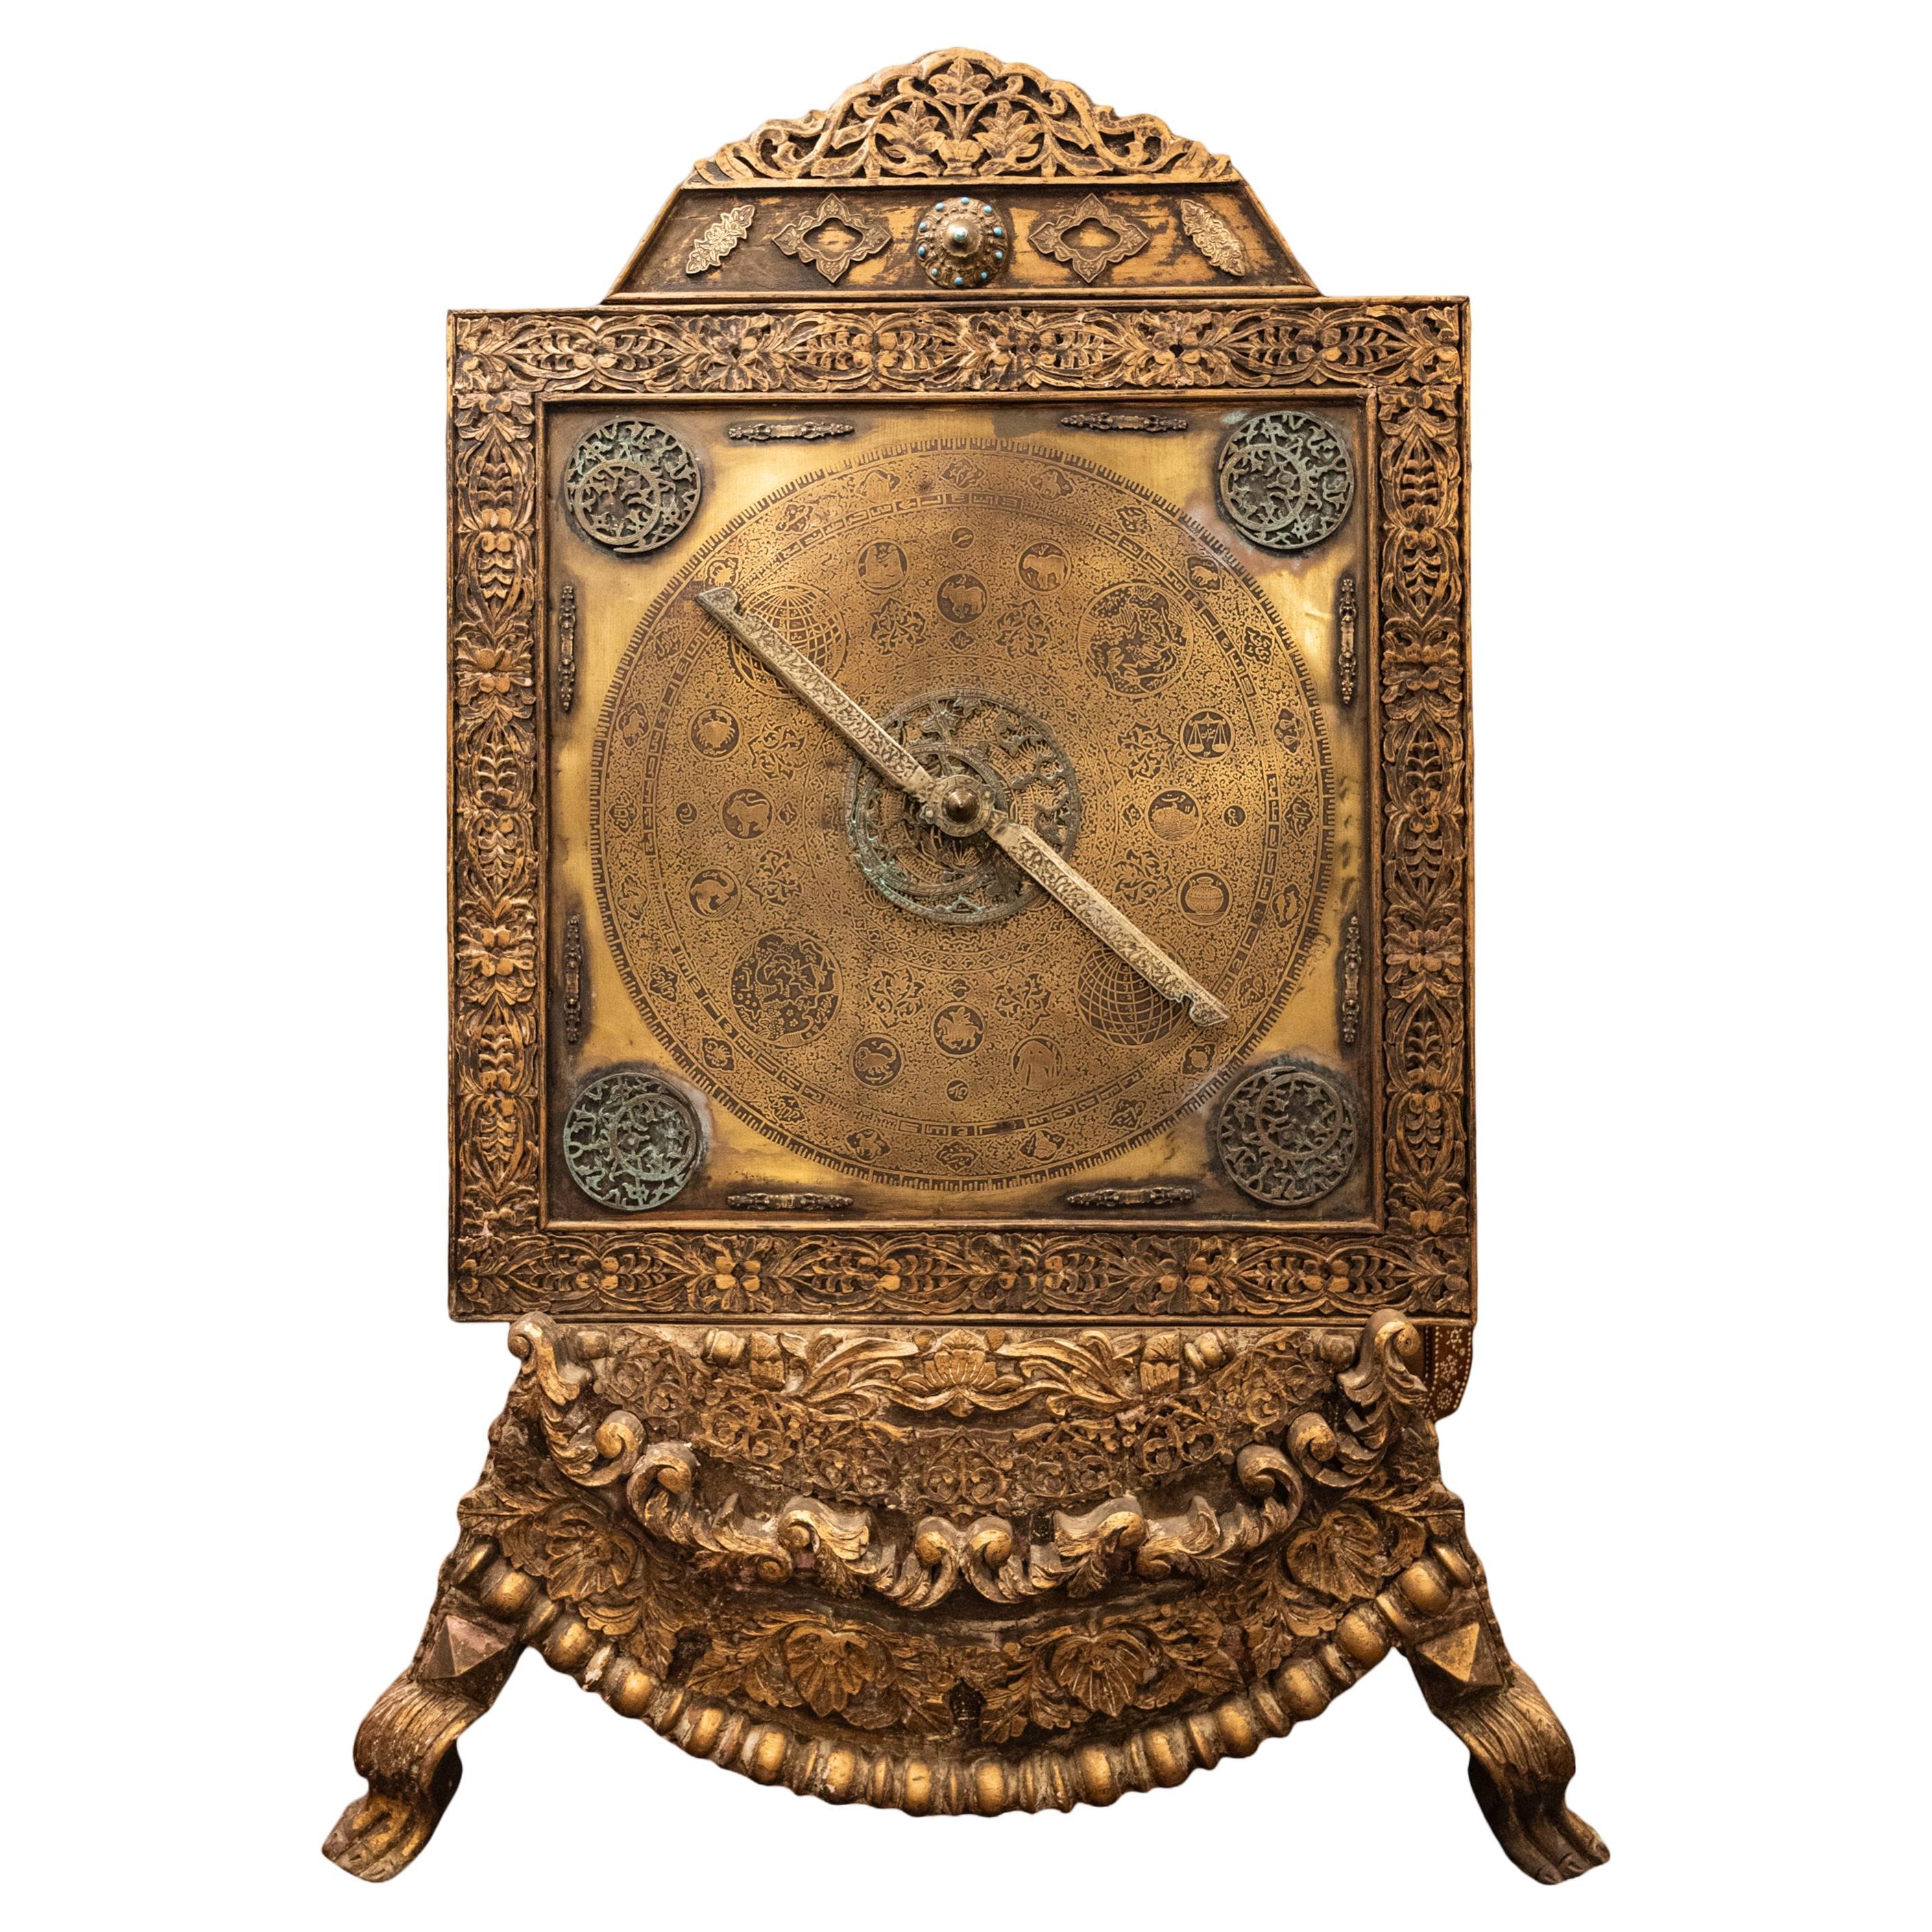 Monumental Antique Islamic Ottoman Safavid Astrological Astrolabe on Stand 1720 For Sale